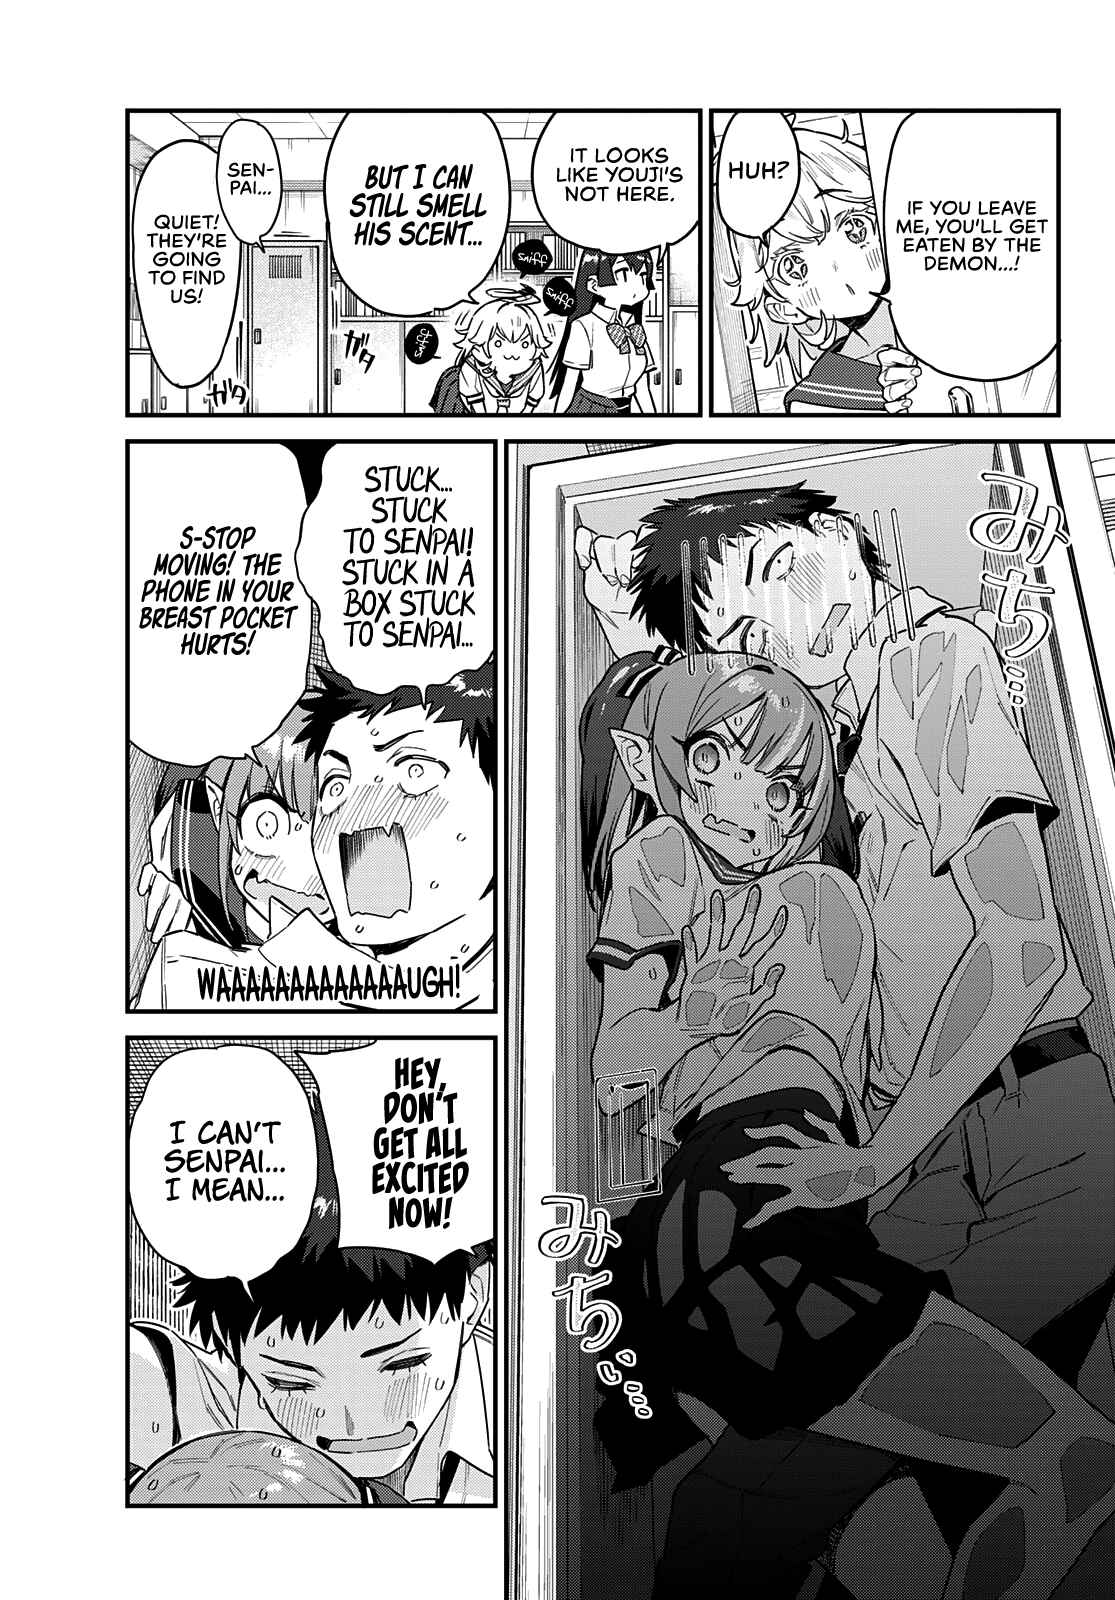 Kanan-Sama Is Easy As Hell! - 45 page 4-984287a4